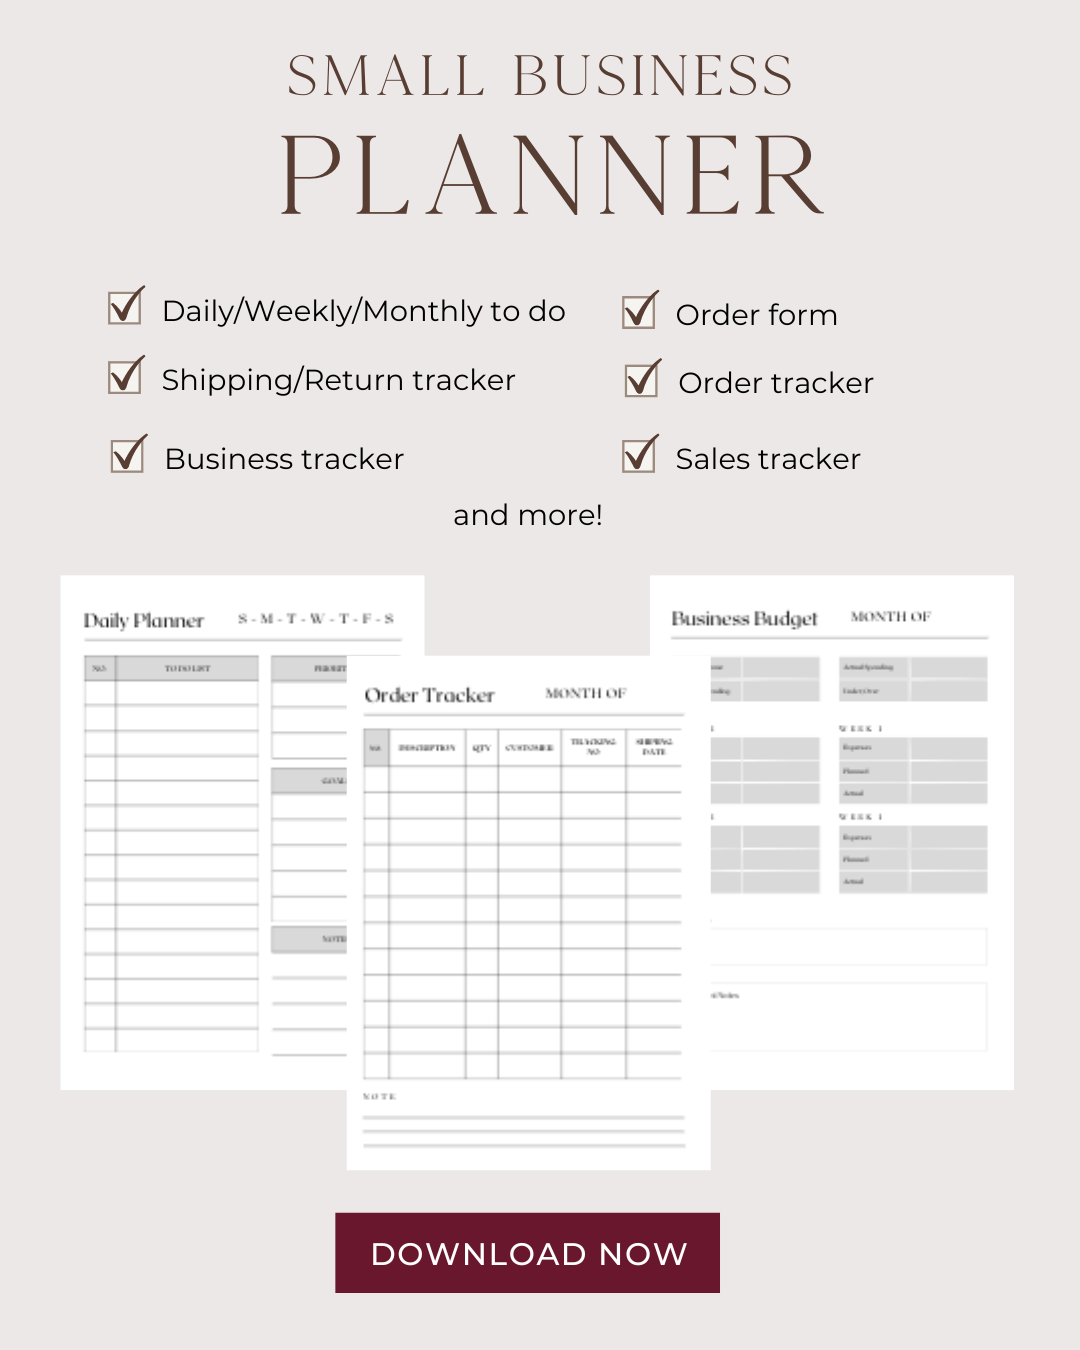 Small Business Planner | Printable